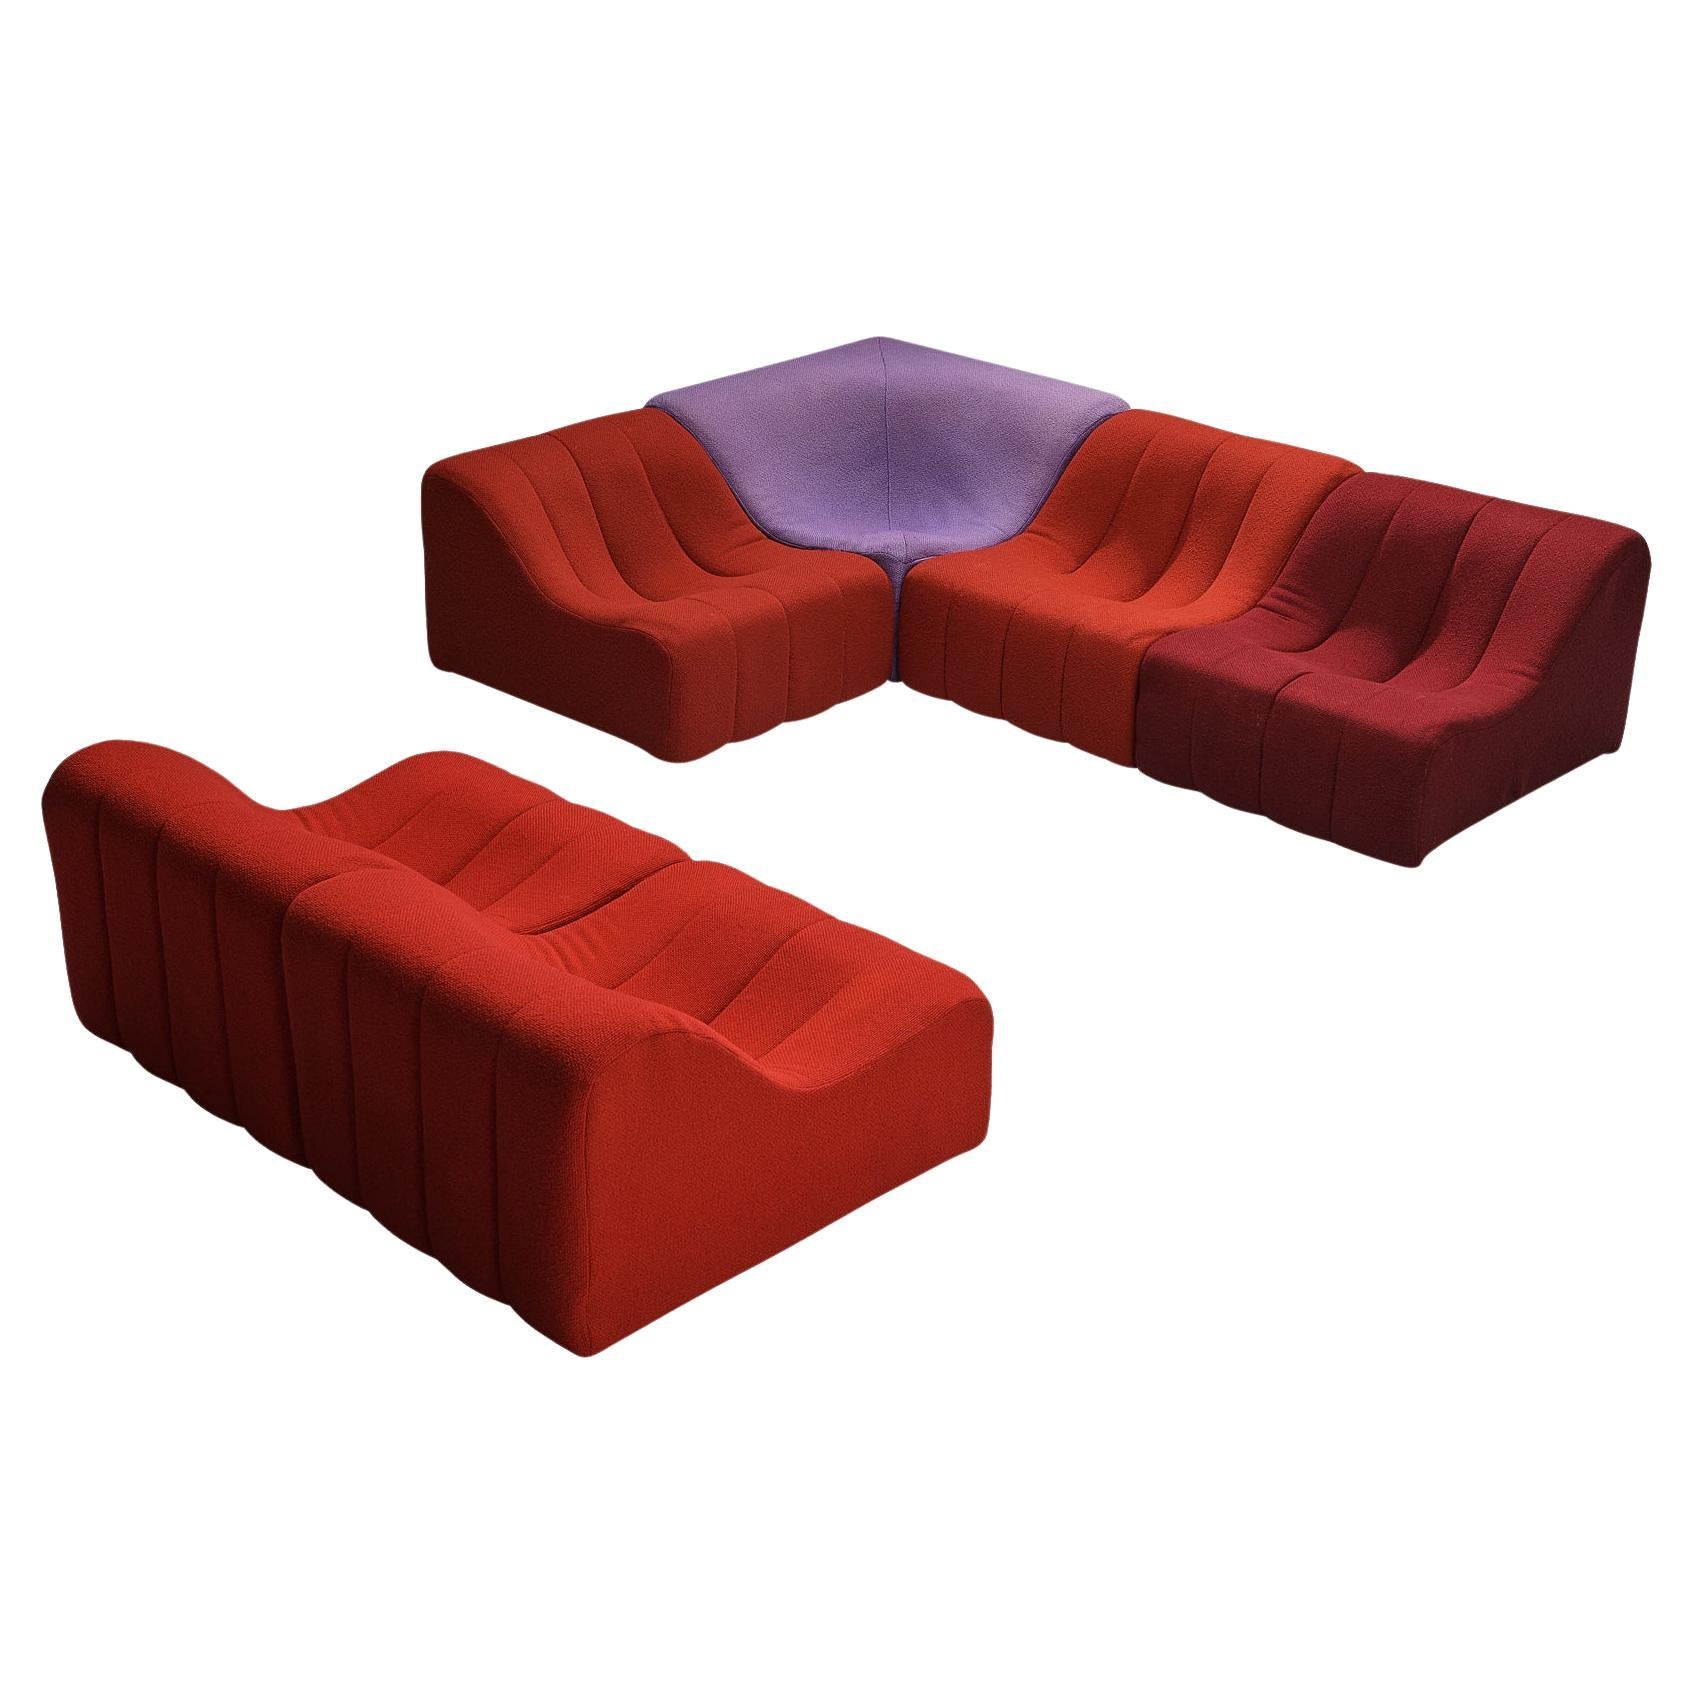 Kwok Hoi Chan for Steiner 'Chromatic' Modular Sofa in Red Purple Colors  For Sale